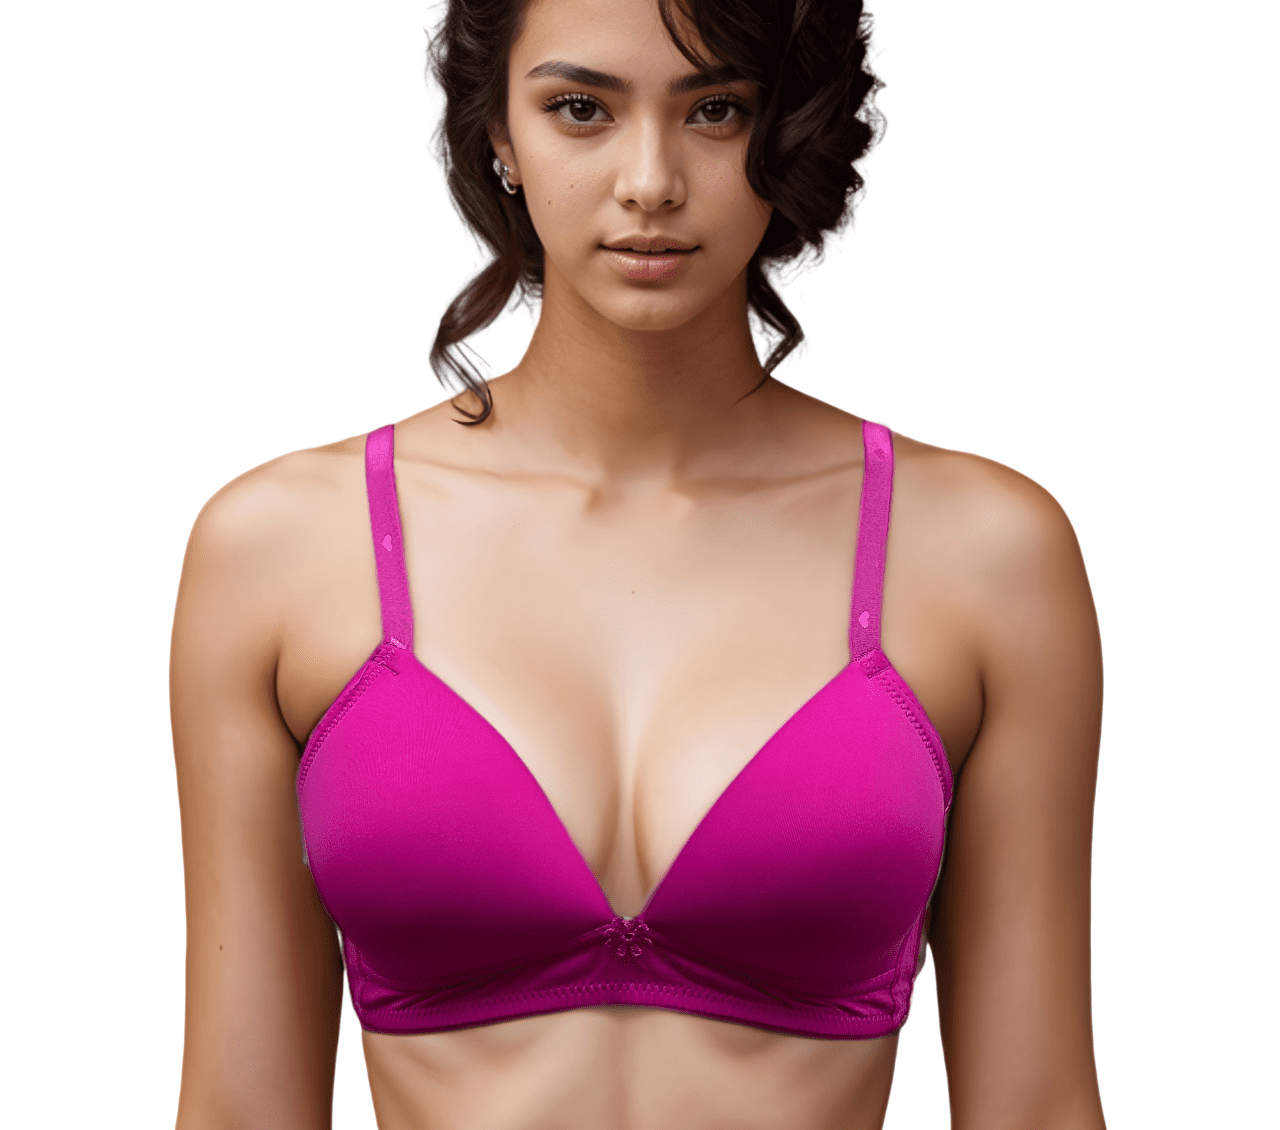 Buy India Bazar ROOPSI Non Wired Bra by INDIABAZAAR Size 32 C Cup - Pack of  6 (SLROOPSI32-6) at